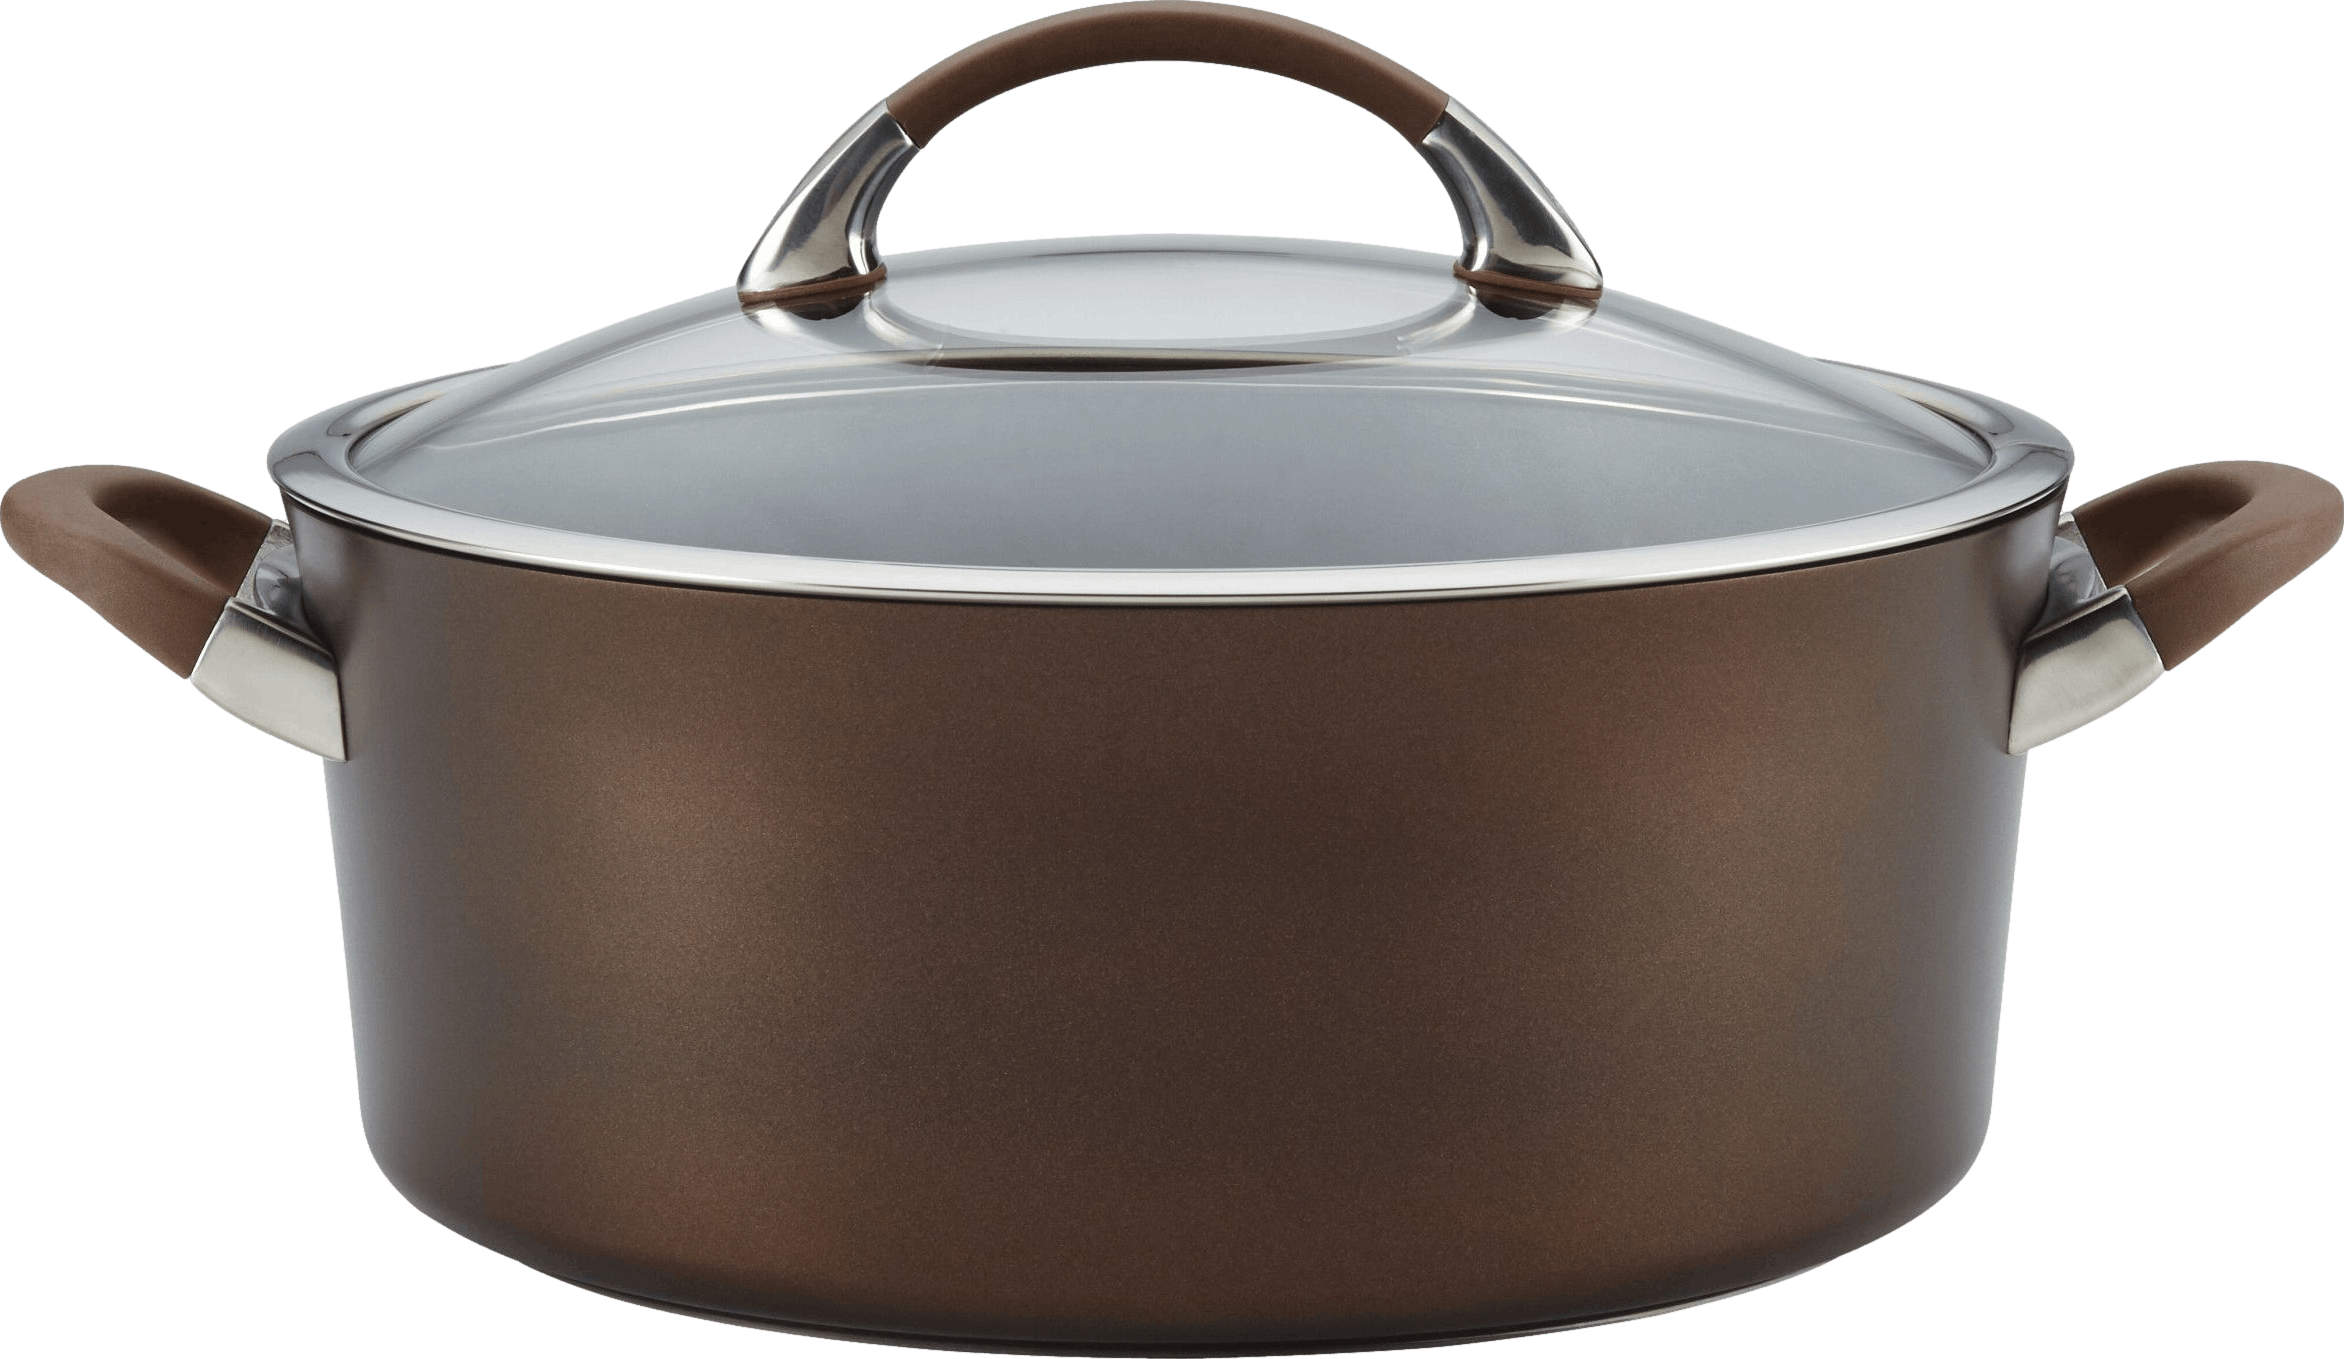 Circulon Symmetry Hard-Anodized Nonstick Induction Dutch Oven with Lid, 7-Quart, Chocolate